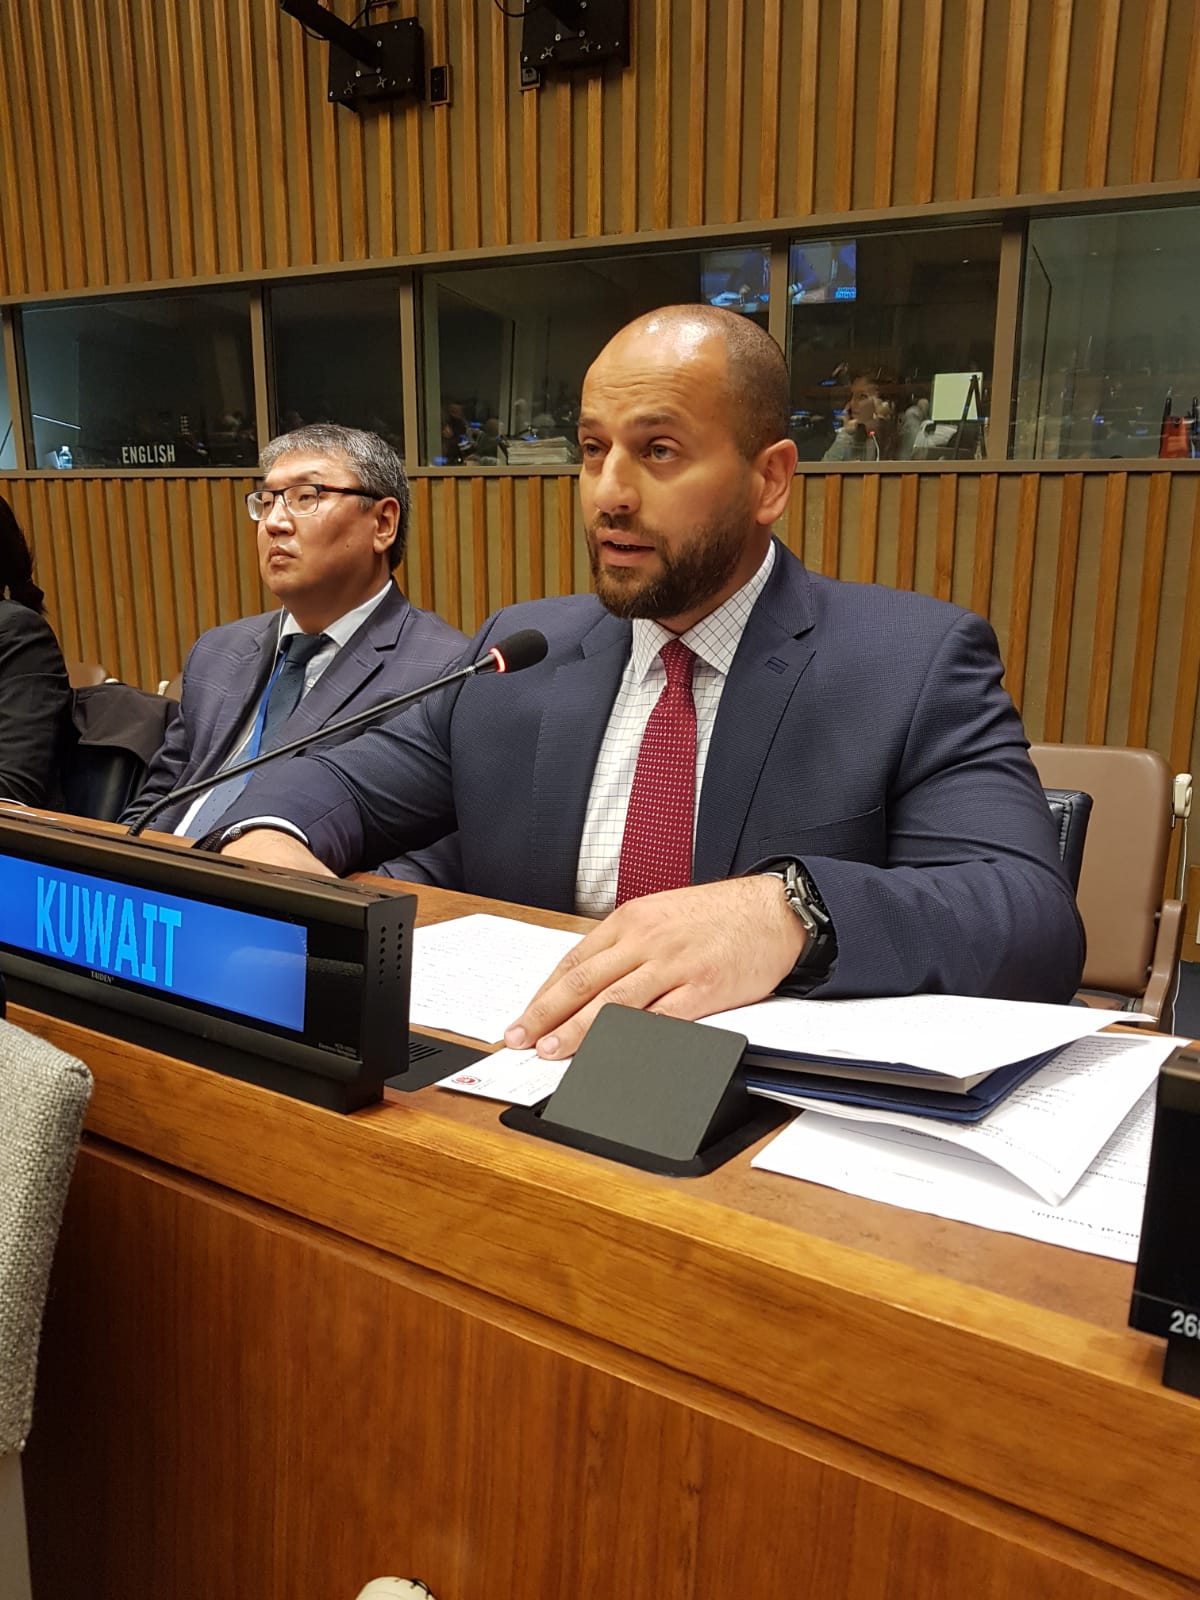 Speech of Kuwait's permanent delegation to the United Nations, delivered by First Secretary Bashar Al-Duwaisan